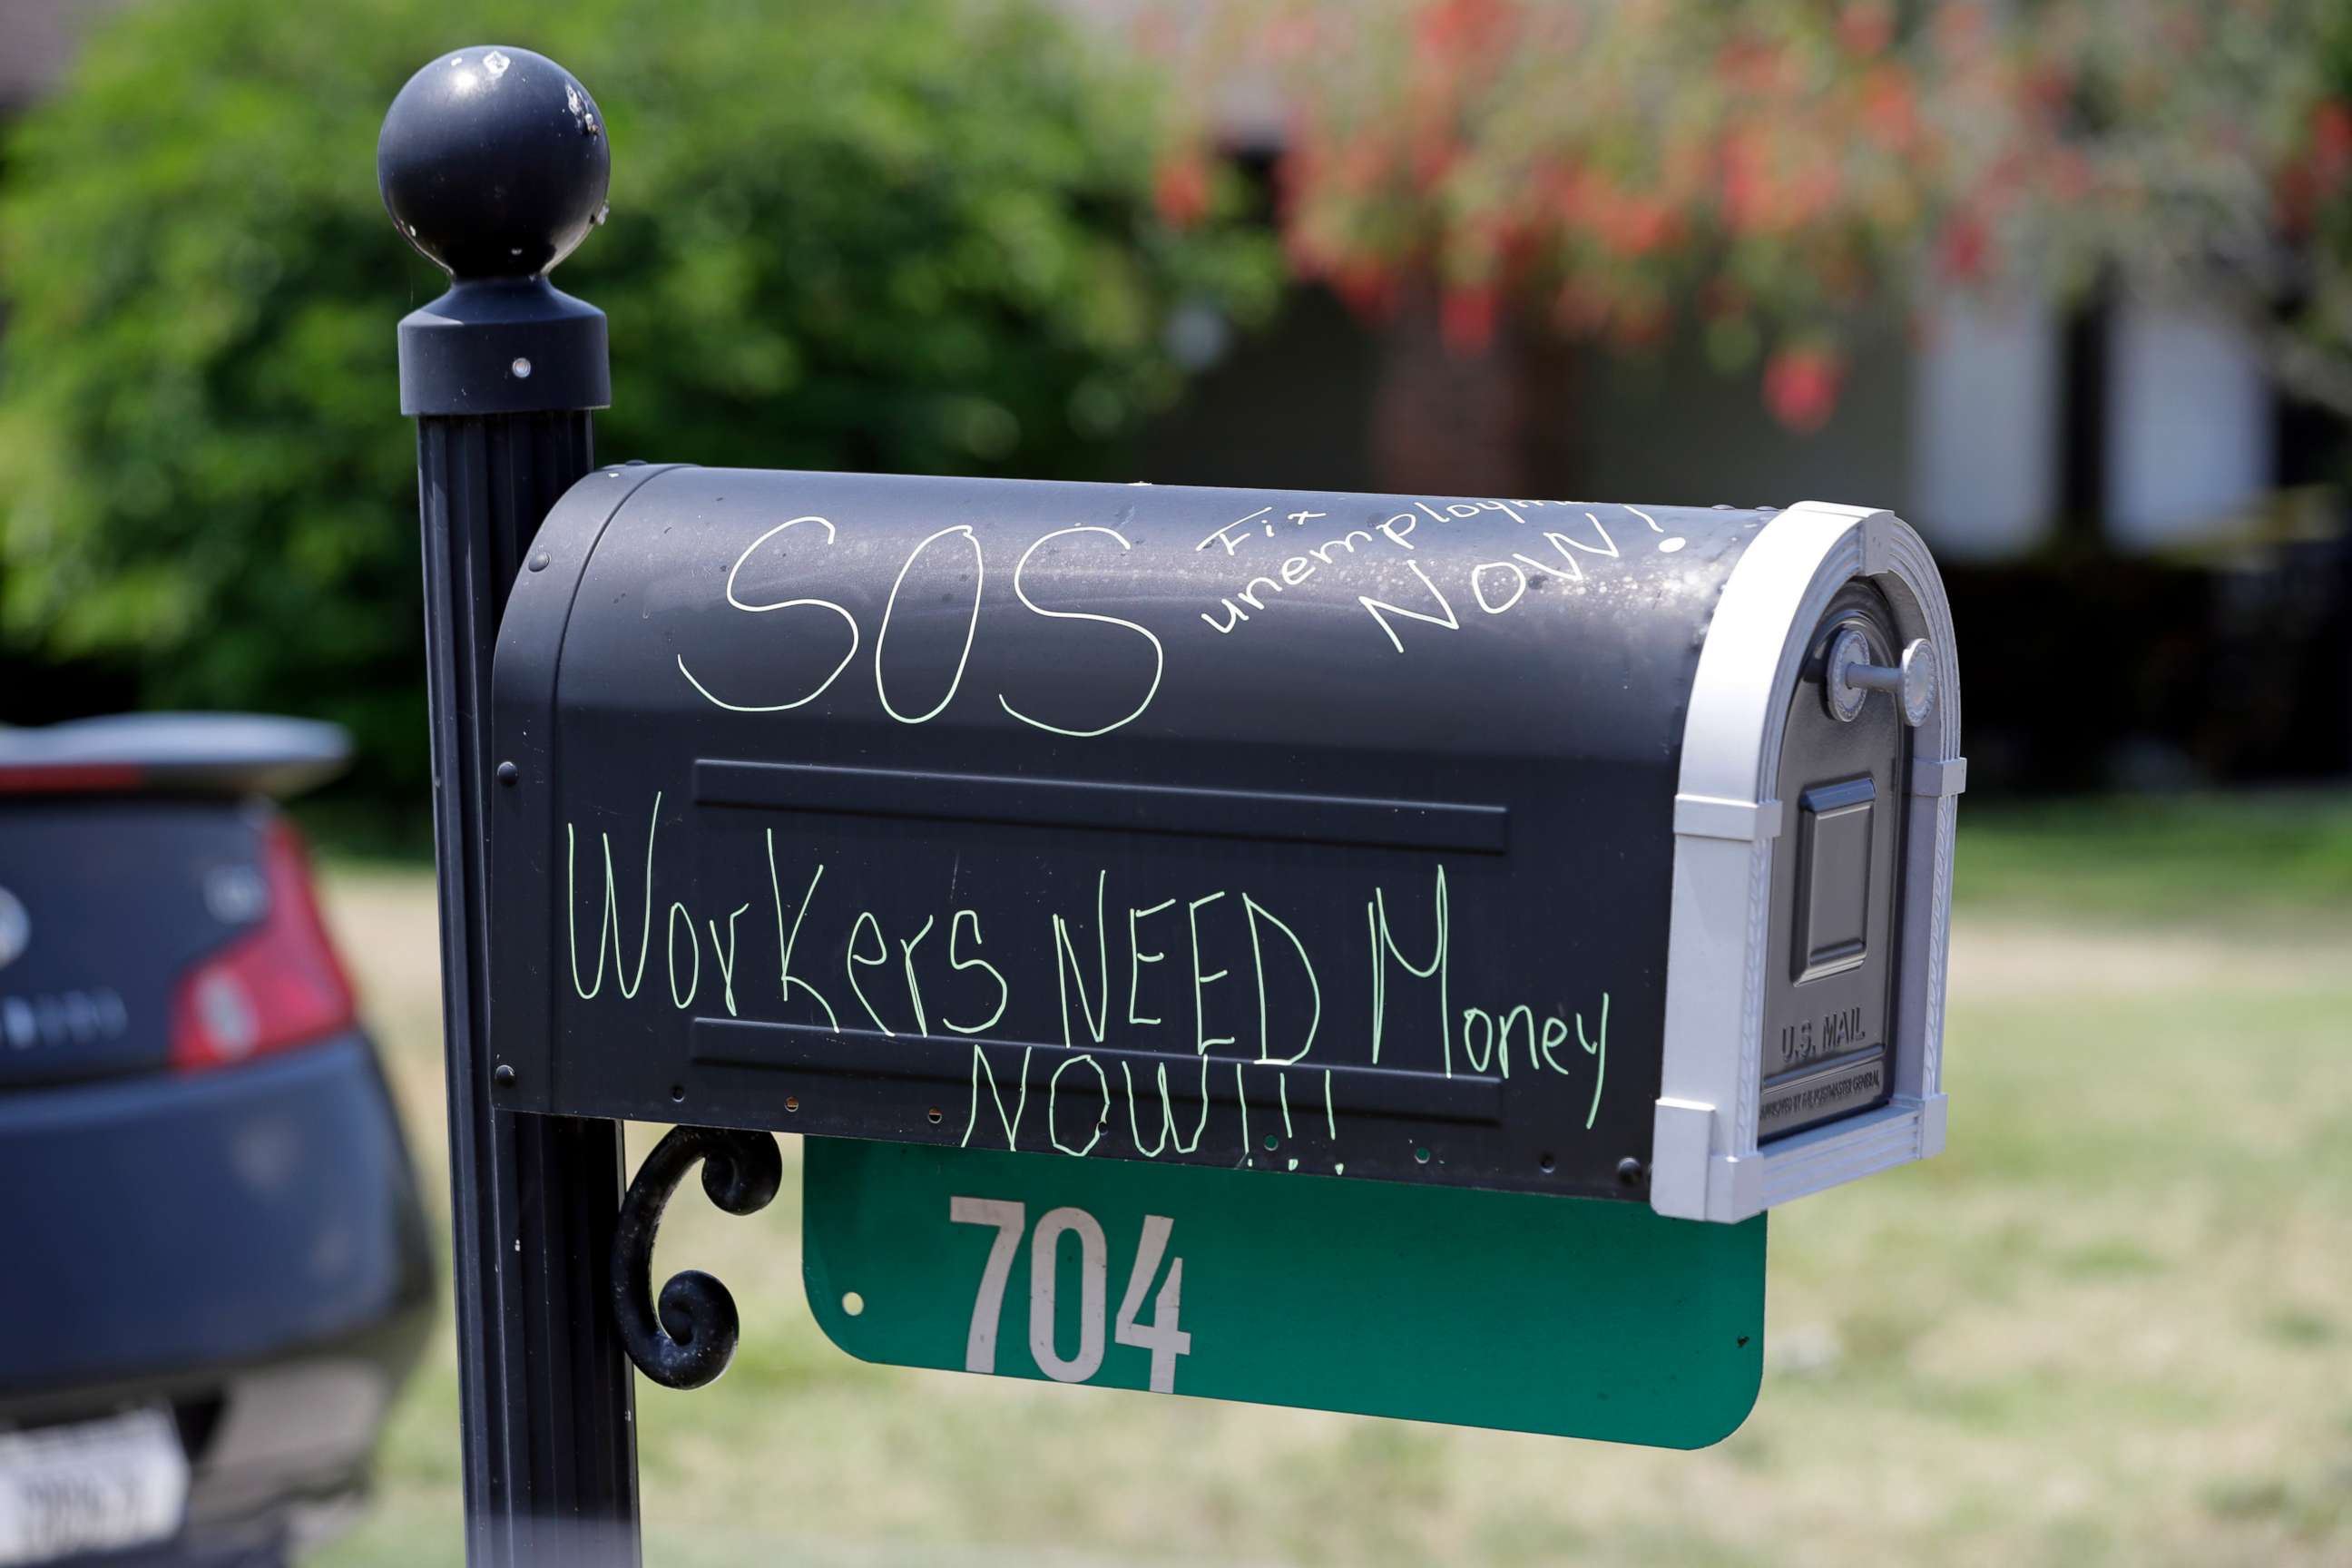 PHOTO: A plea for help is written on the mailbox of the home of a recently furloughed employee of Disney World, April 13, 2020, in Kissimmee, Fla.